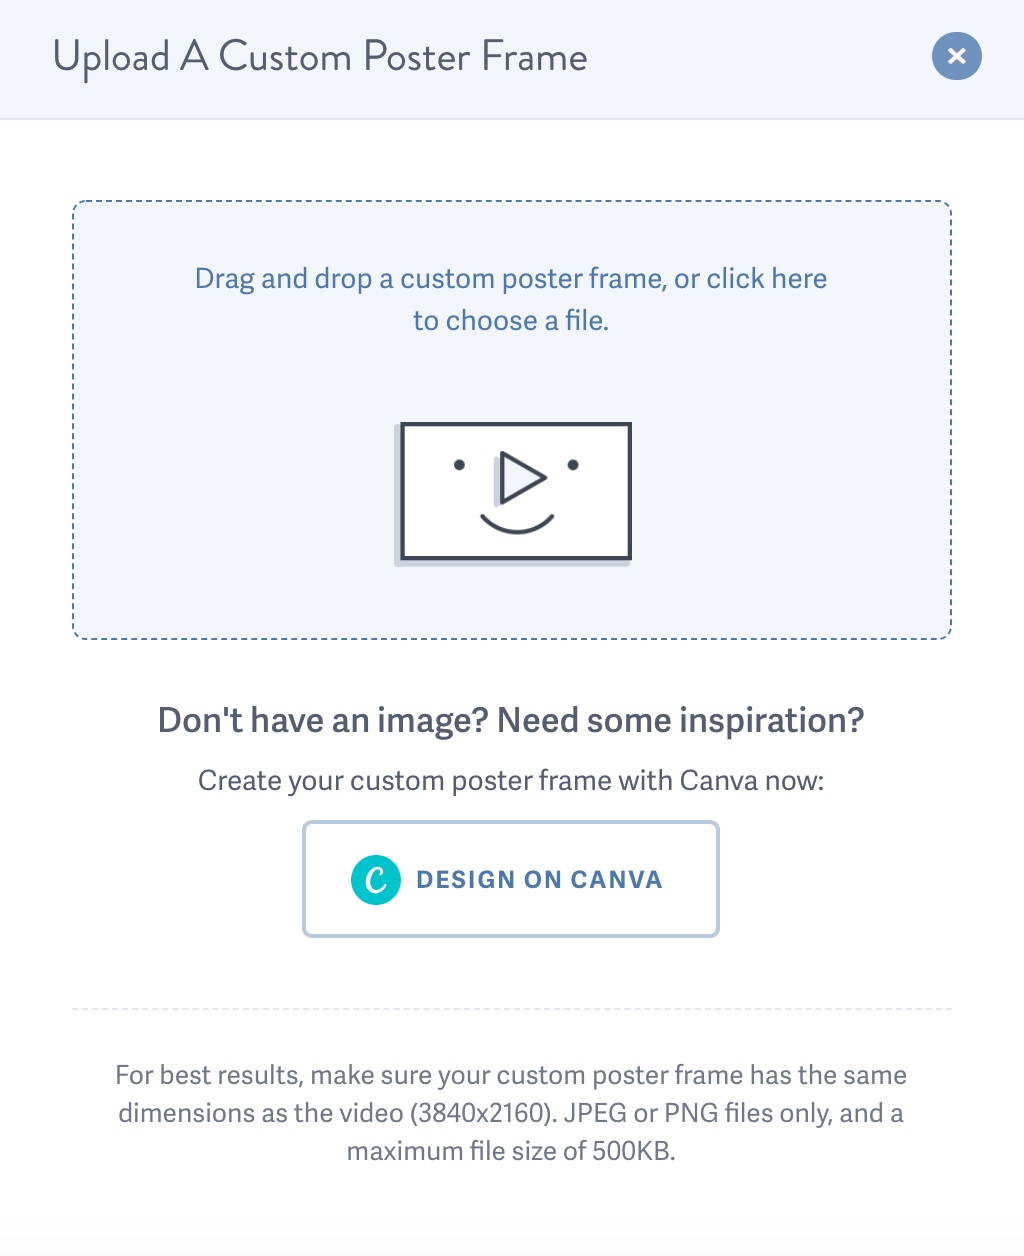 Upload a custom poster frame or design one with Canva